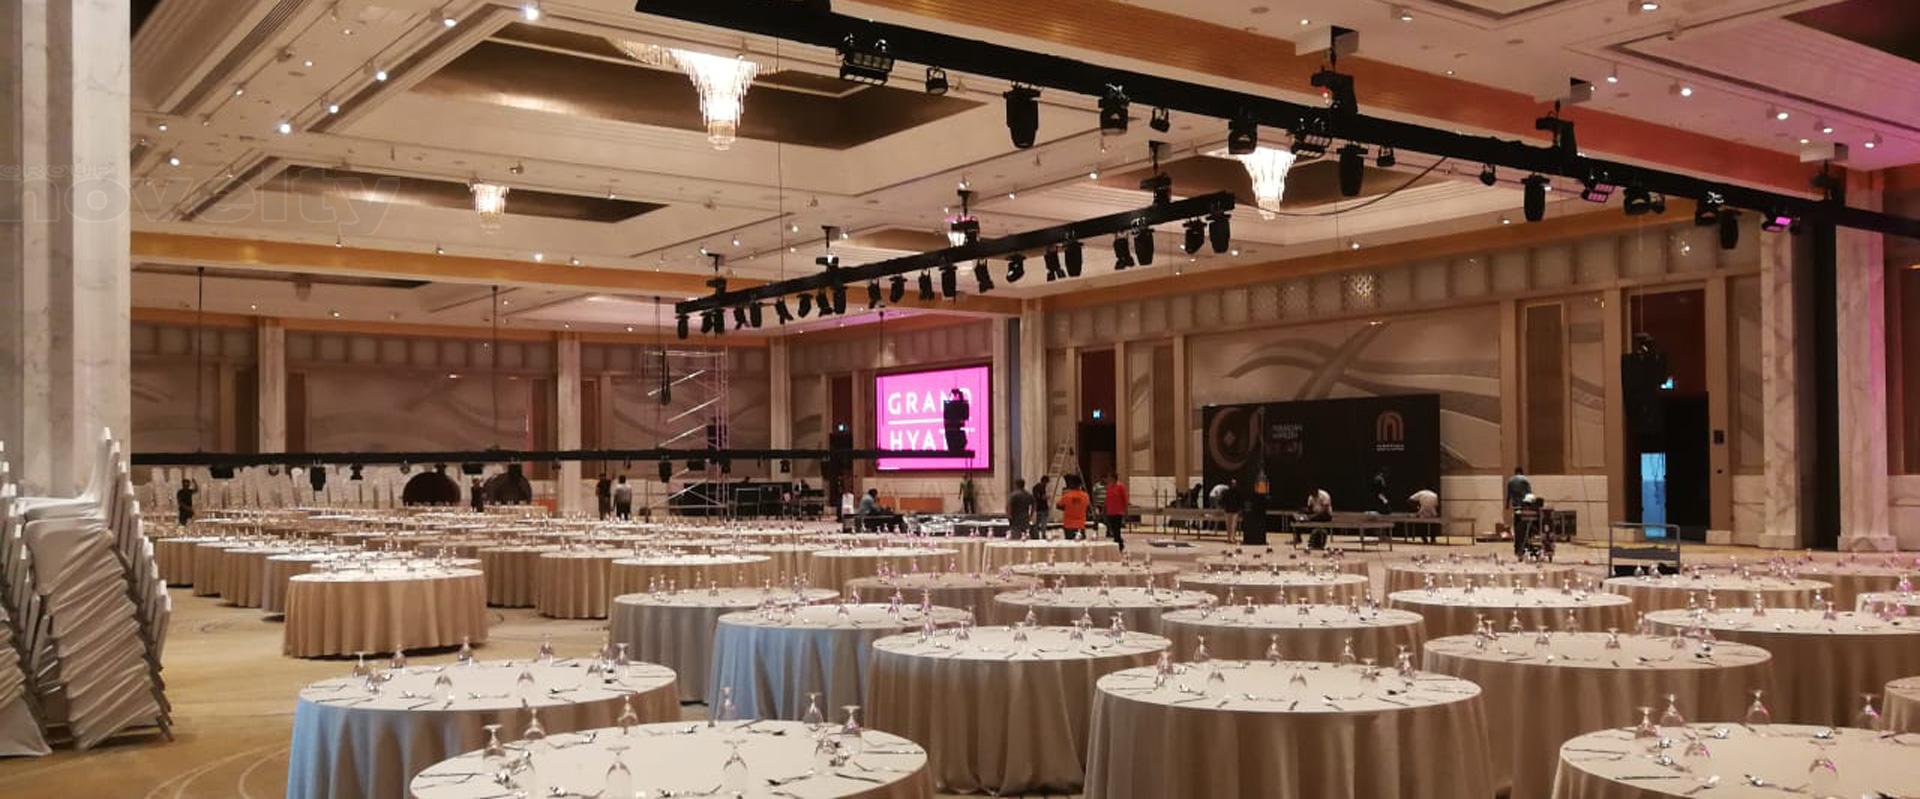 Visuel NOVELTY Middle East for MAF Iftar Dinner by Inspiratus